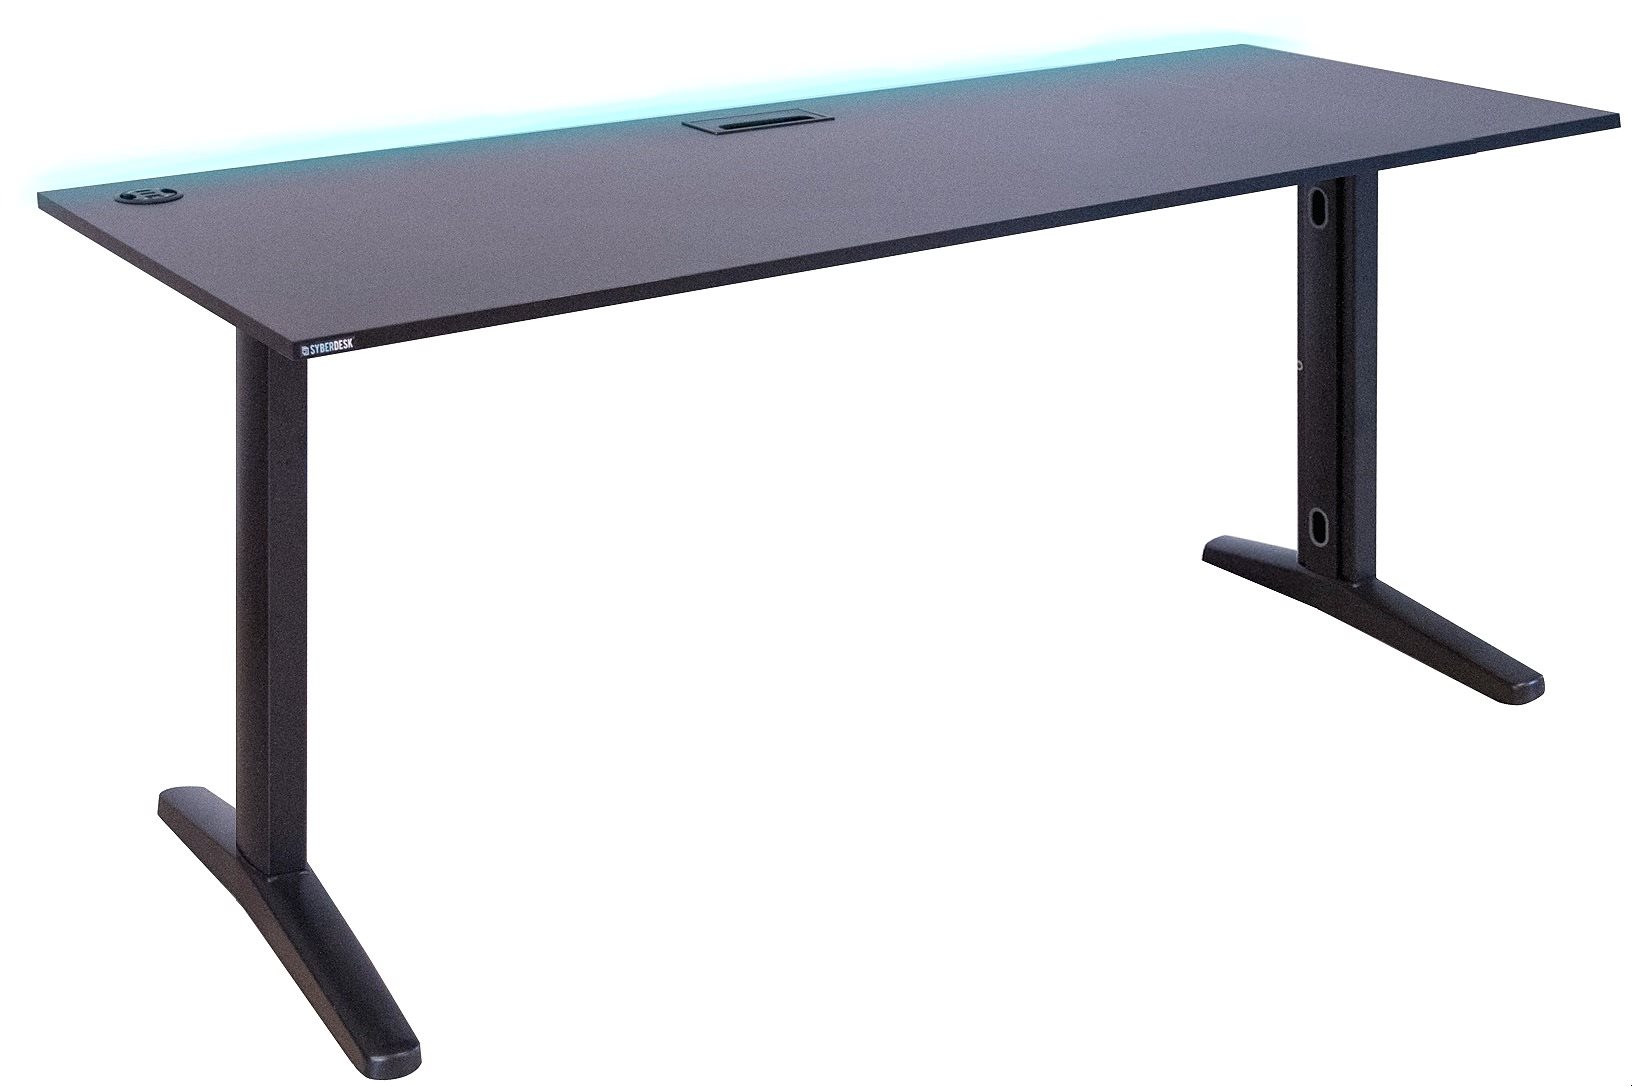 SYBERDESK ULTRA XXL, 165 x 68 x 74 - 75 cm, LED, Cable Organisation System, fekete